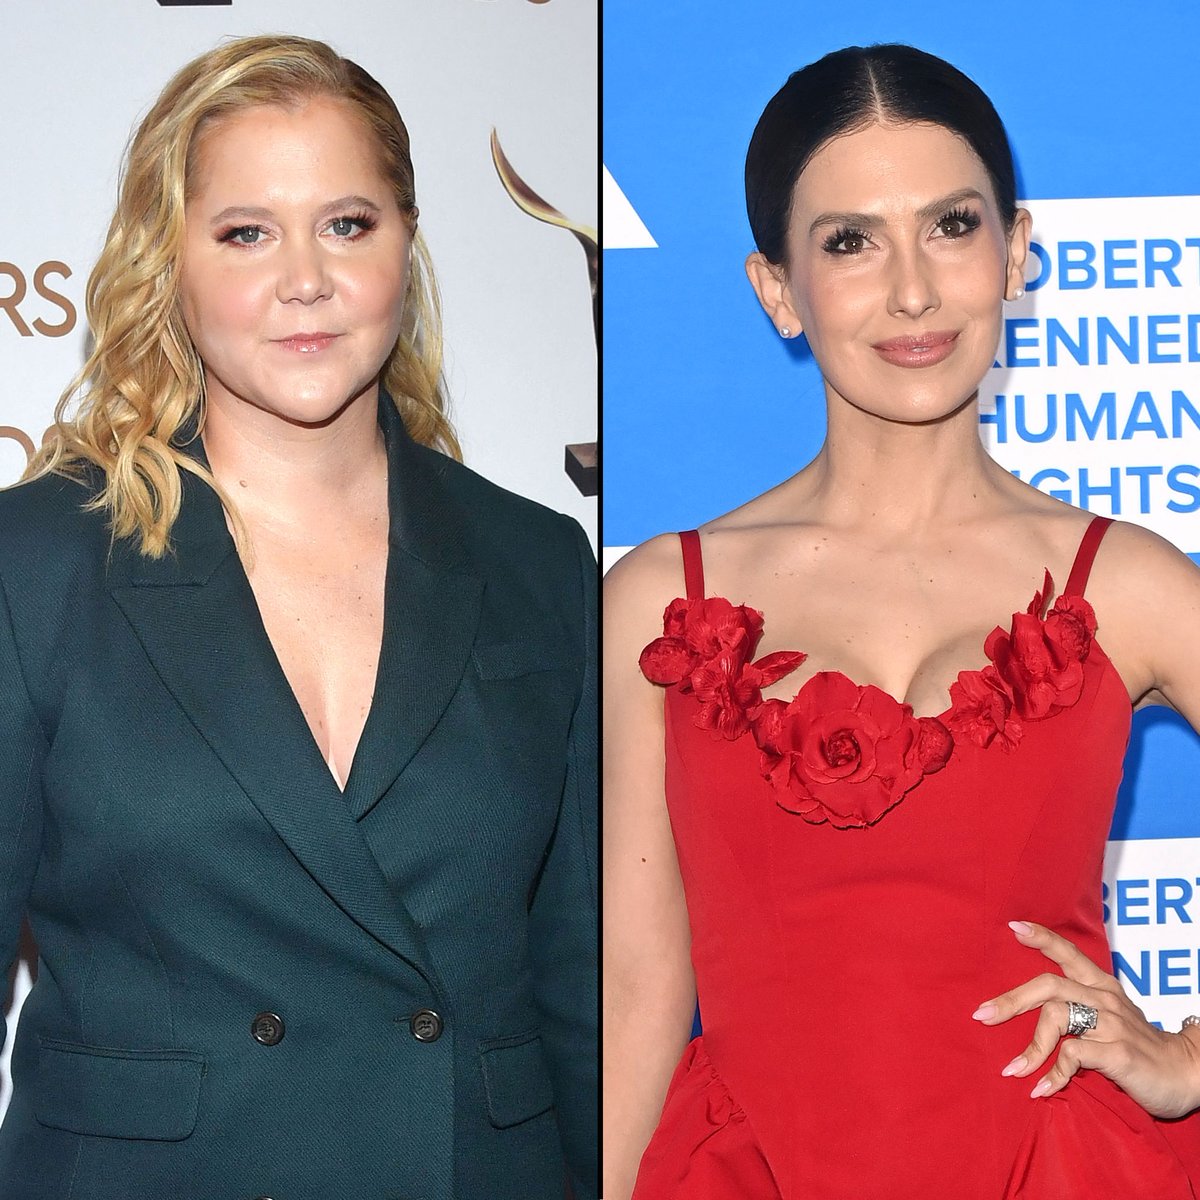 Amy Schumer Pokes Fun at Hilaria Baldwin and Her ‘Von Trapp Amount’ of Kids Amy Schumer and Hilaria Baldwin Shutterstock (2) She went there! Amy Schumer didn’t hold back her thoughts on Hilaria Baldwin and her unique lifestyle choices. During her new Netflix...